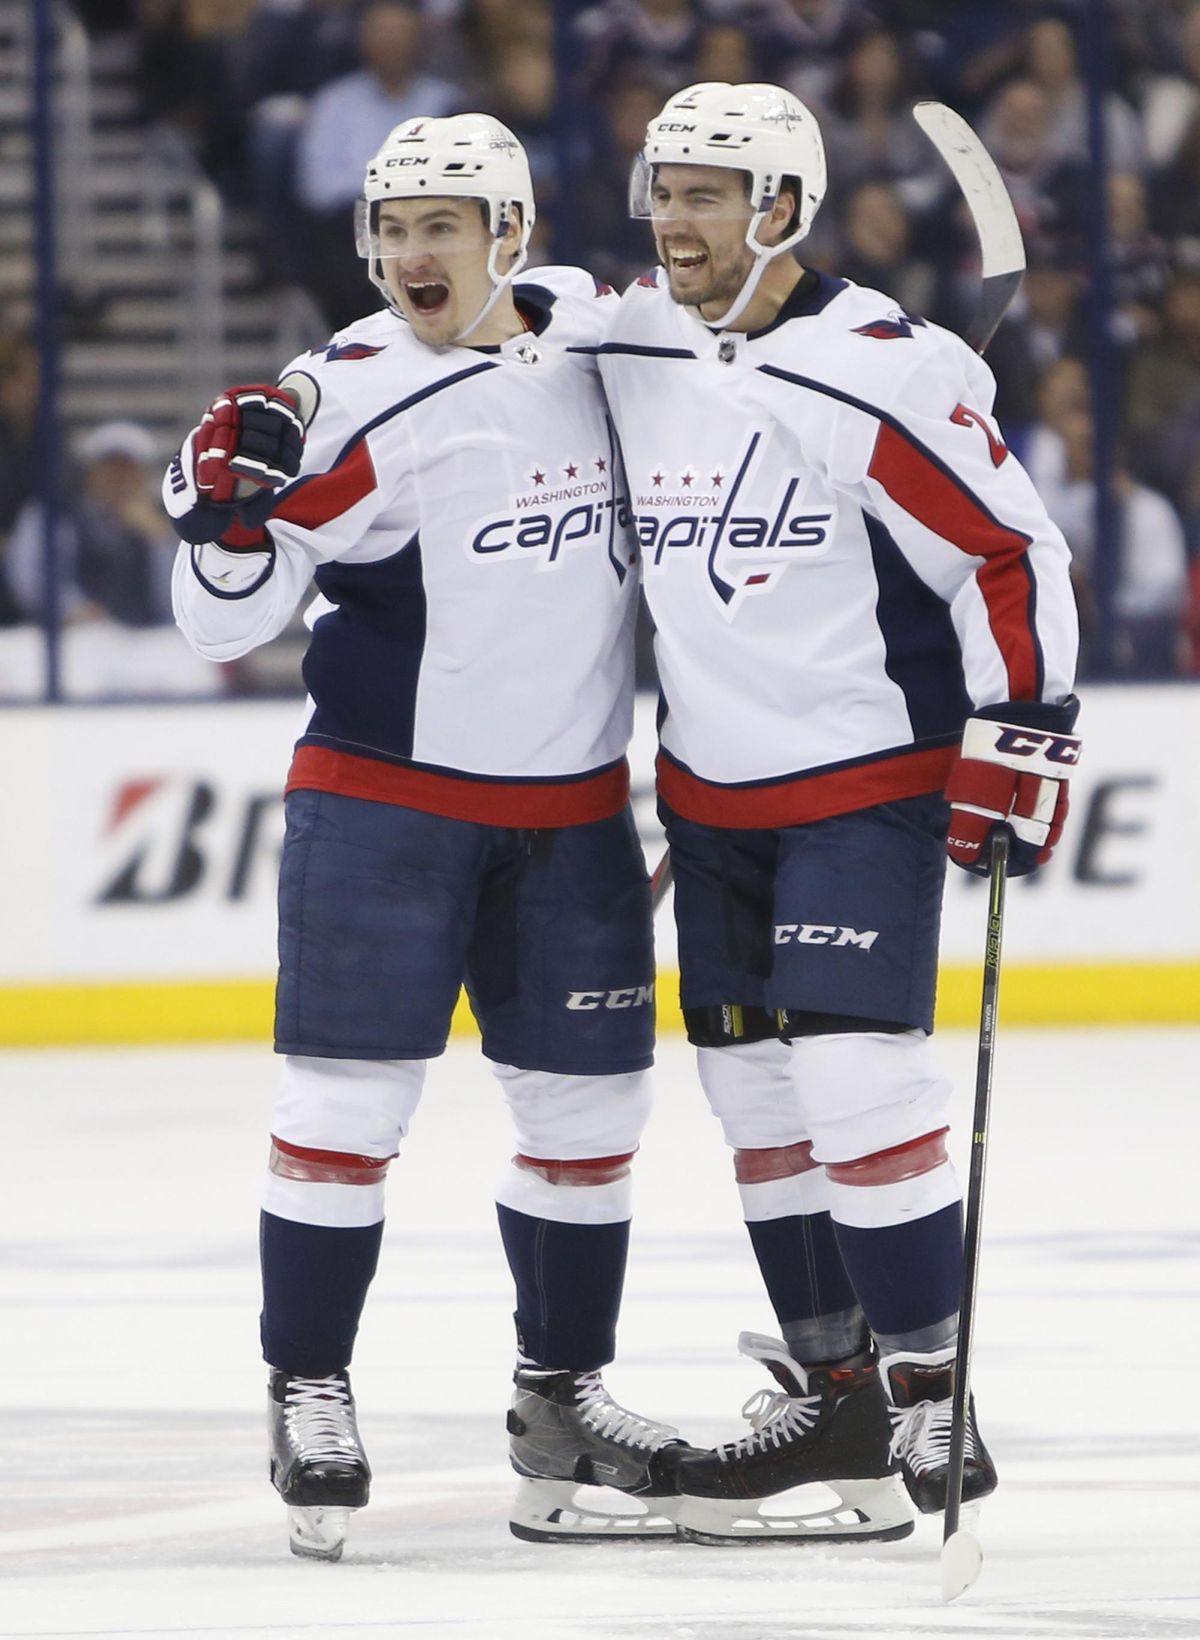 Washington Capitals’ Dmitry Orlov, left, of Russia, celebrates his goal against the Columbus Blue Jackets with teammate Matt Niskanen during the first period of Game 6 of an NHL first-round hockey playoff series Monday, April 23, 2018, in Columbus, Ohio. (Jay LaPrete / Associated Press)